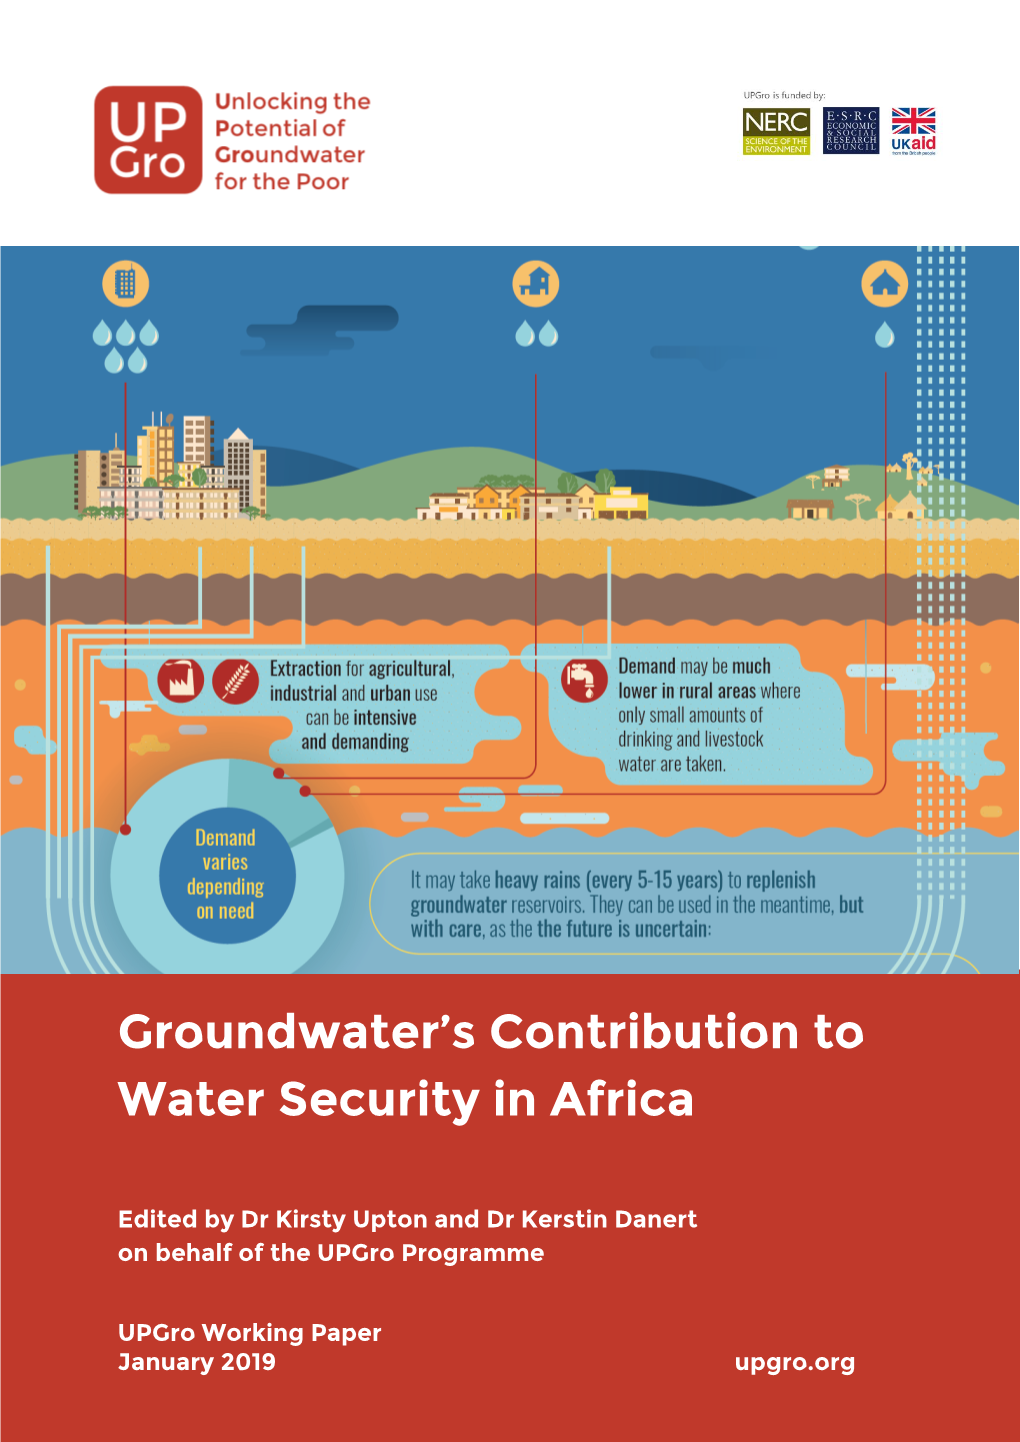 Groundwater's Contribution to Water Security in Africa